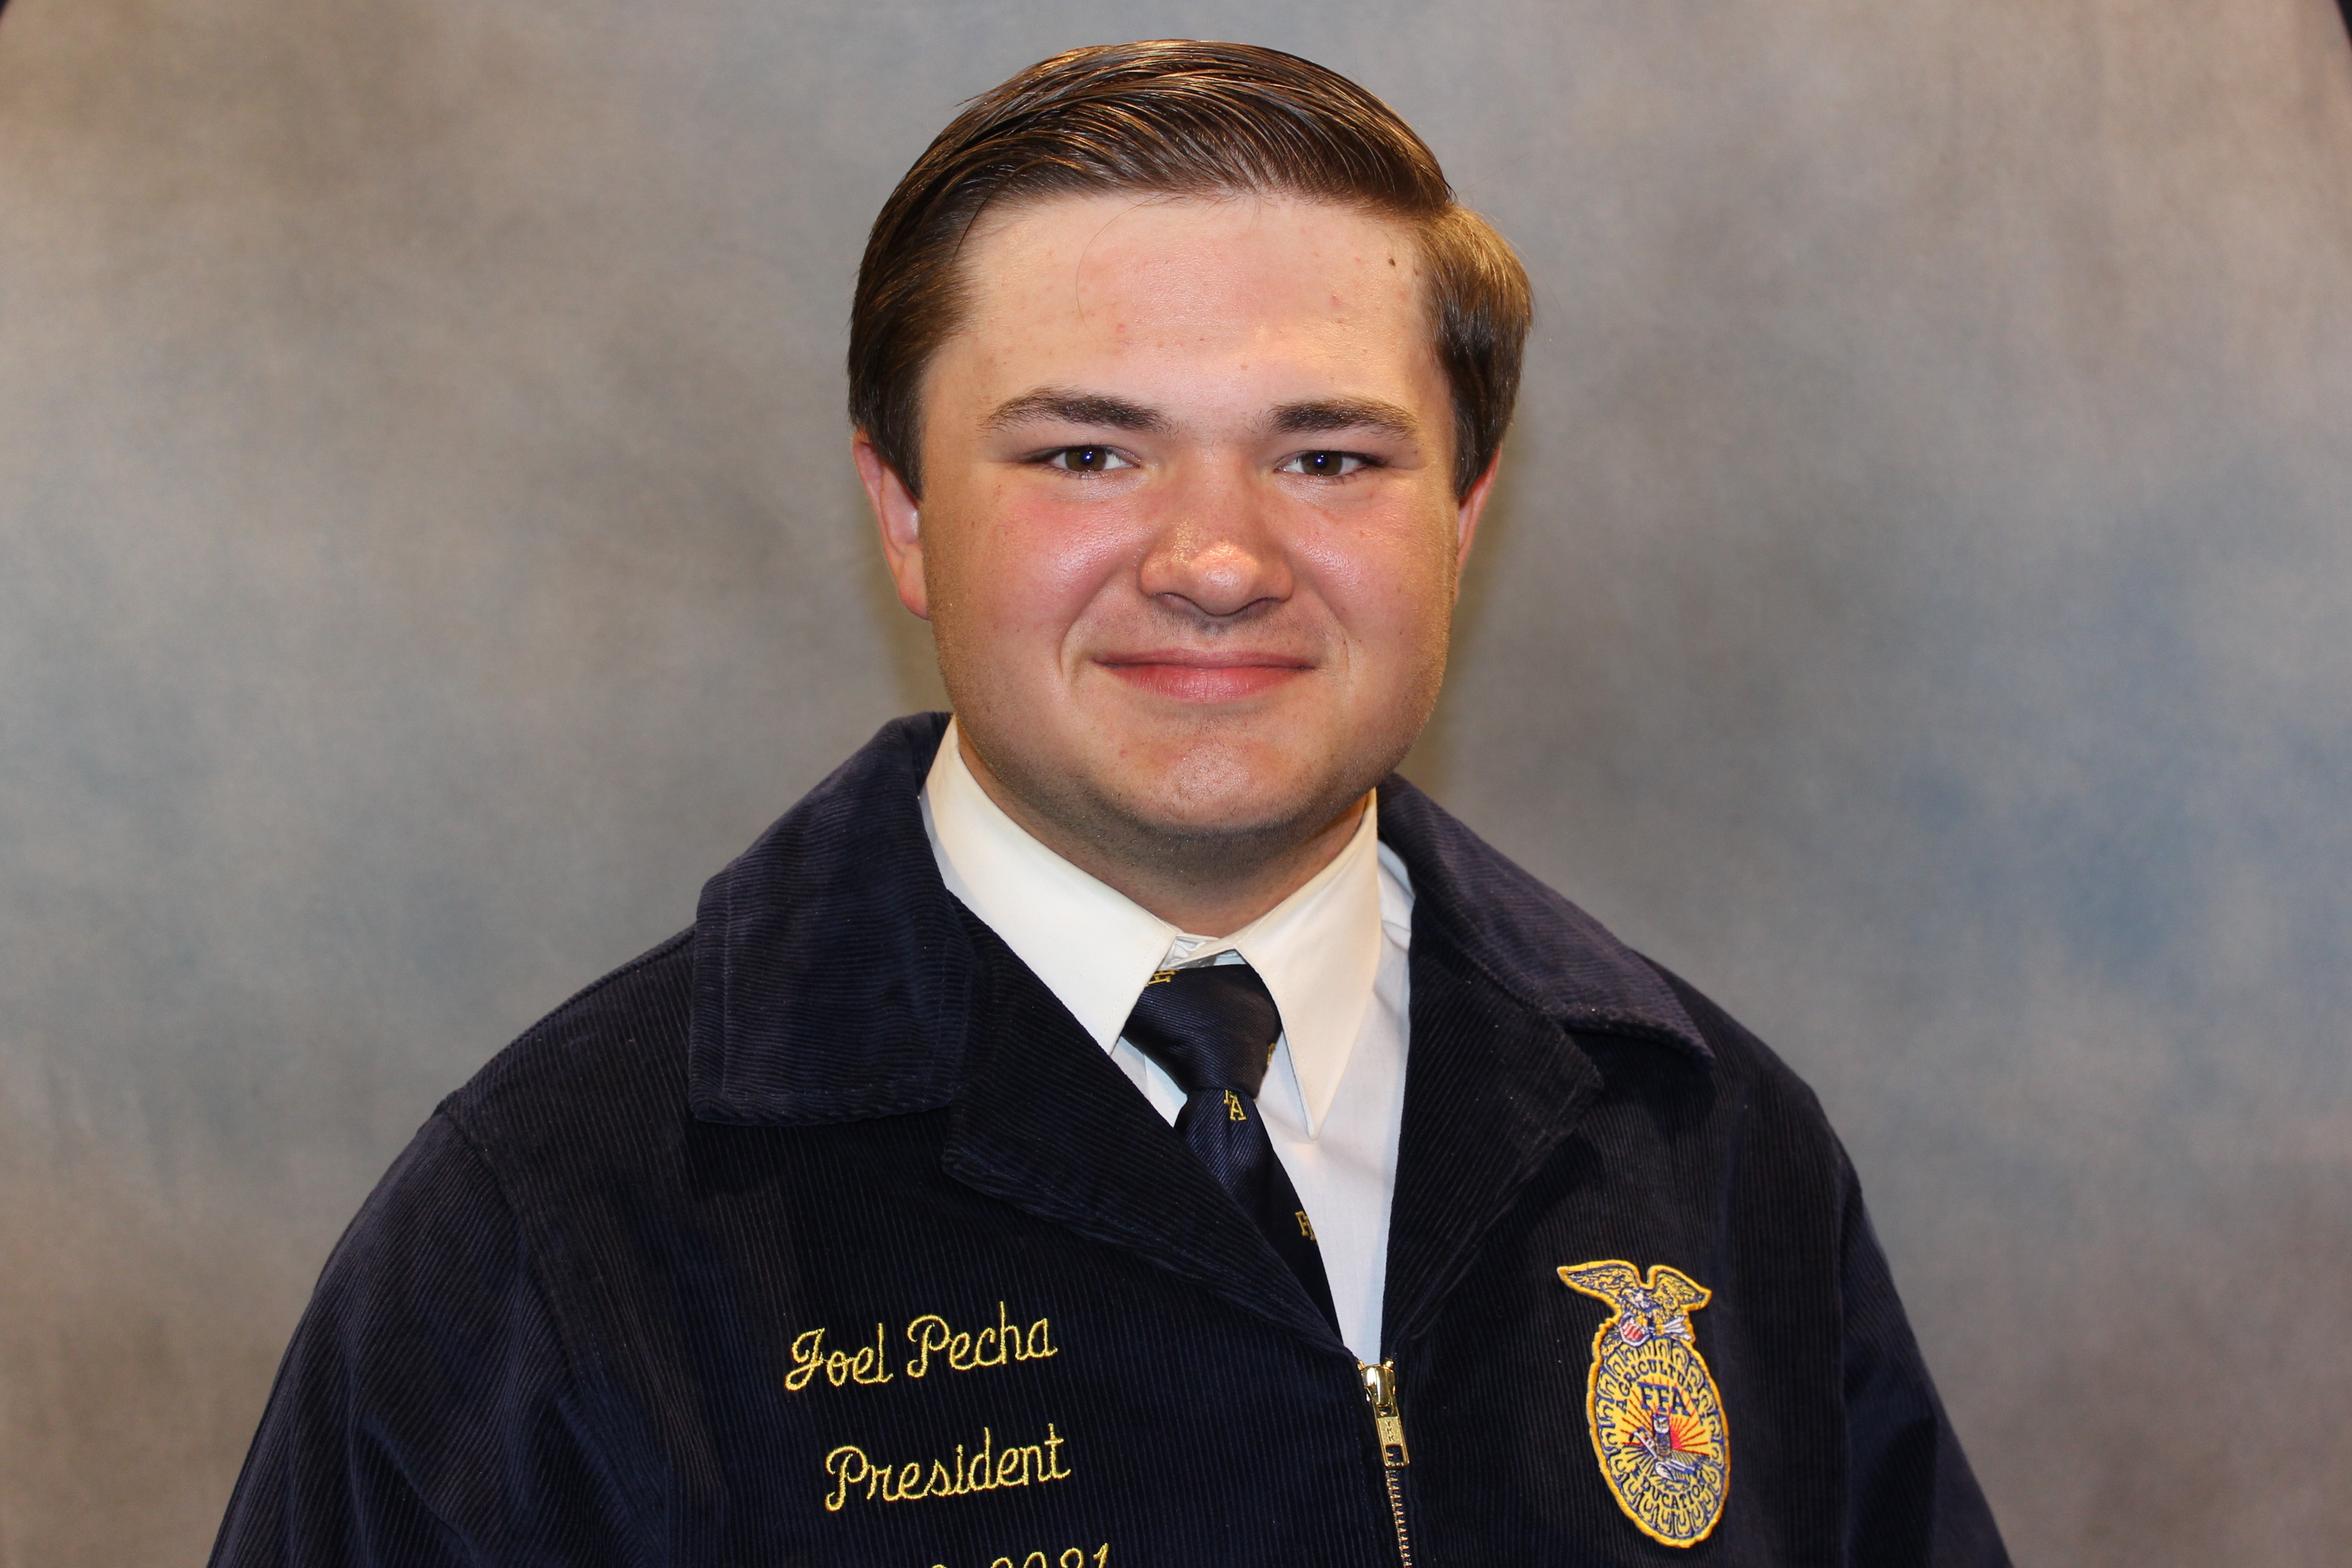 Introducing Joel Pecha of the Timberlake FFA Chapter, Your 2021 Northwest Area Star in Ag Placement 